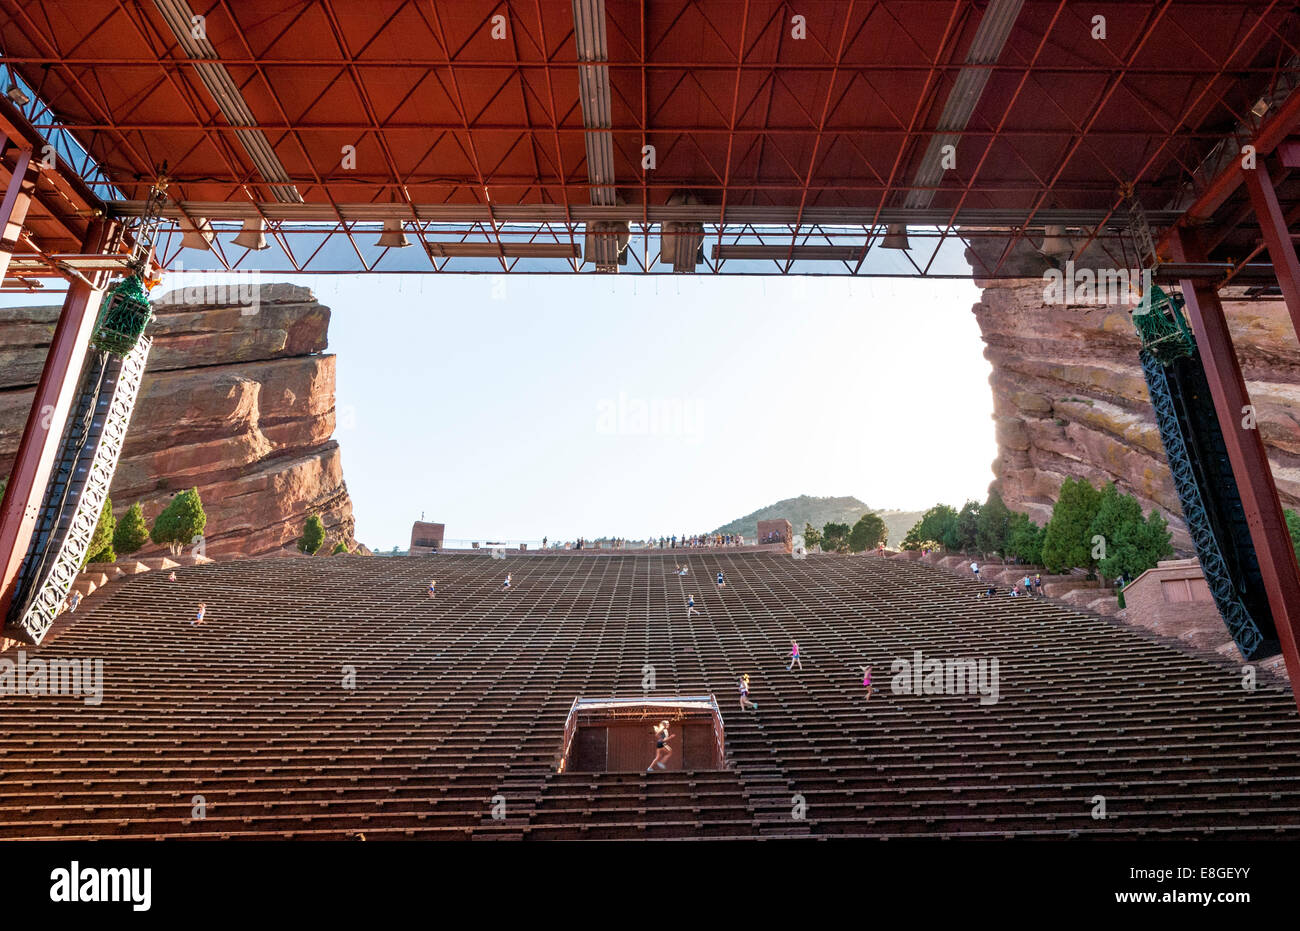 Popular amphitheater in Colorado with runners Stock Photo